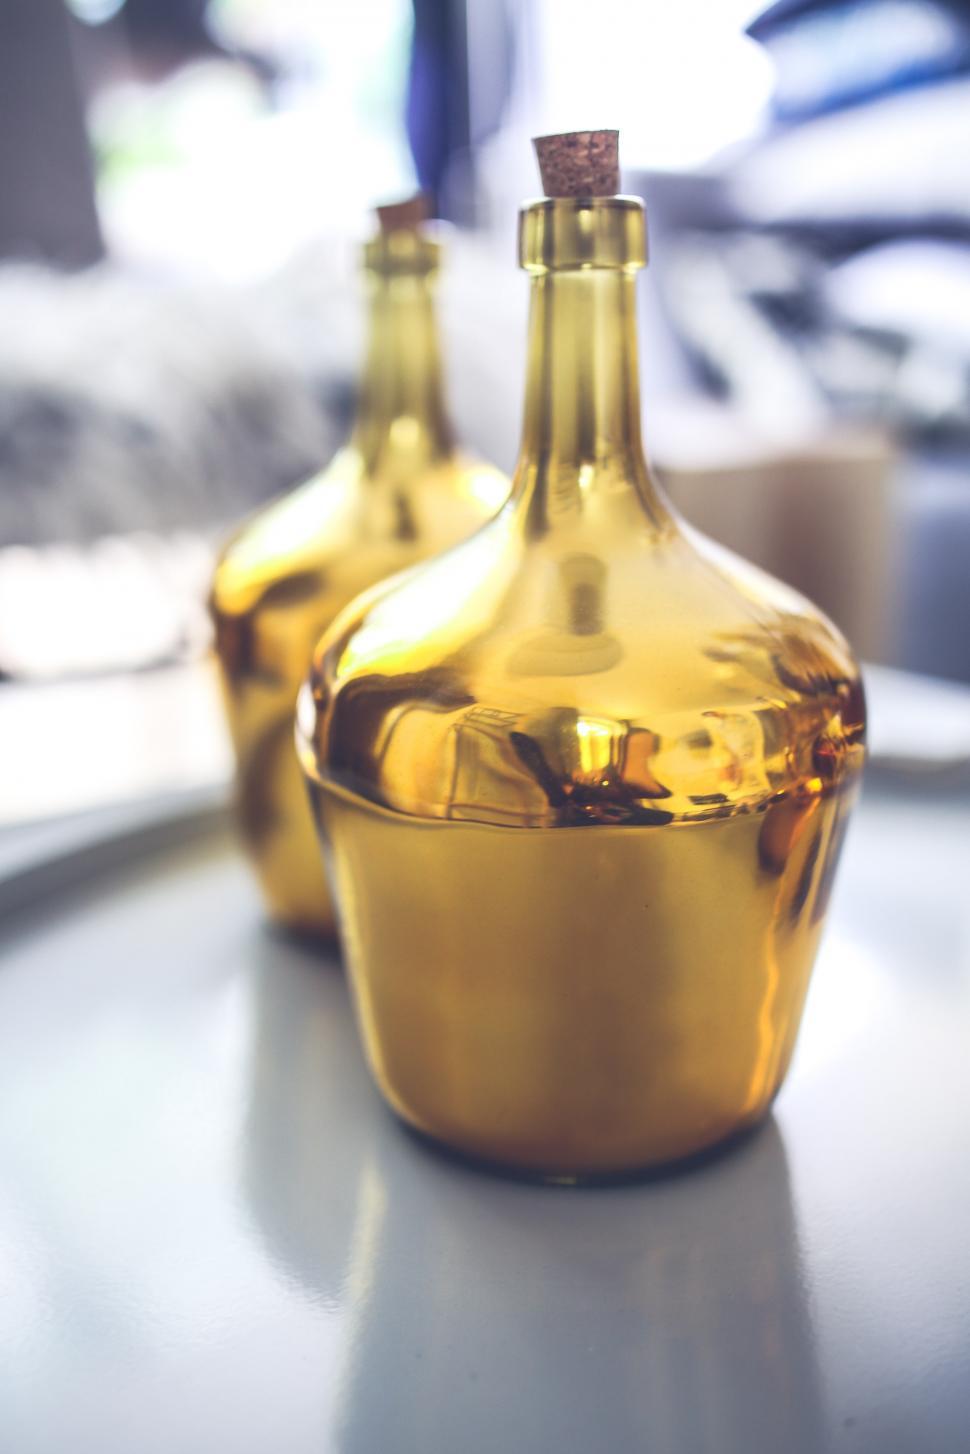 Free Image of Close Up of a Gold Colored Bottle on a Table 